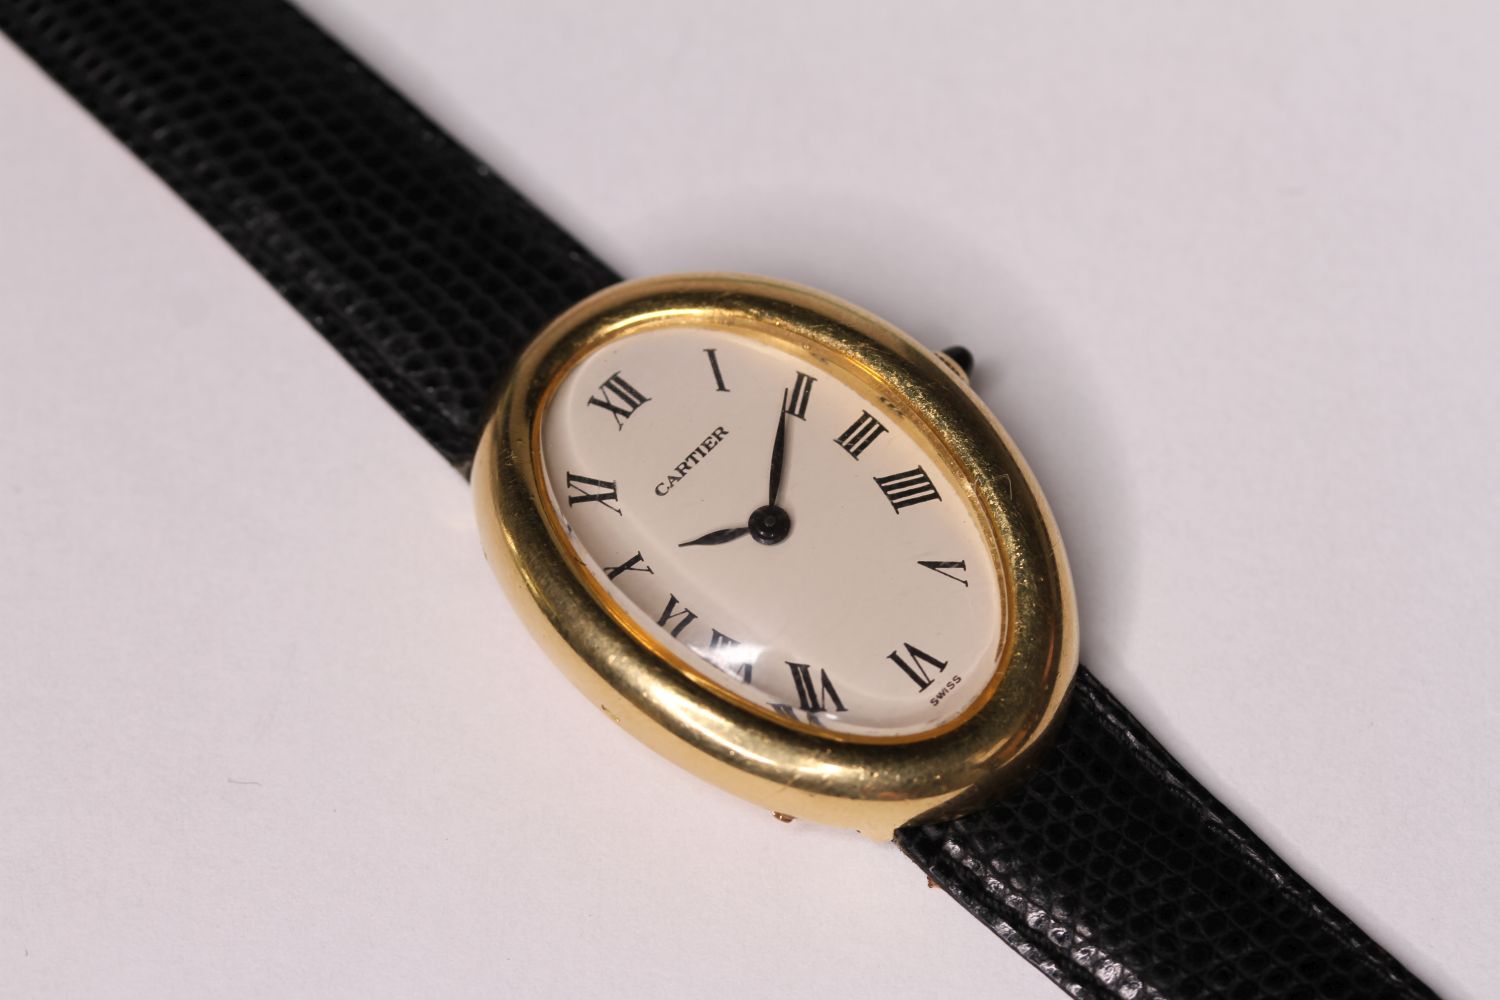 LADIES VINTAGE CARTIER BAIGNOIRE 18CT YELLOW GOLD WRISTWATCH REF 4048, oval cream dial with roman